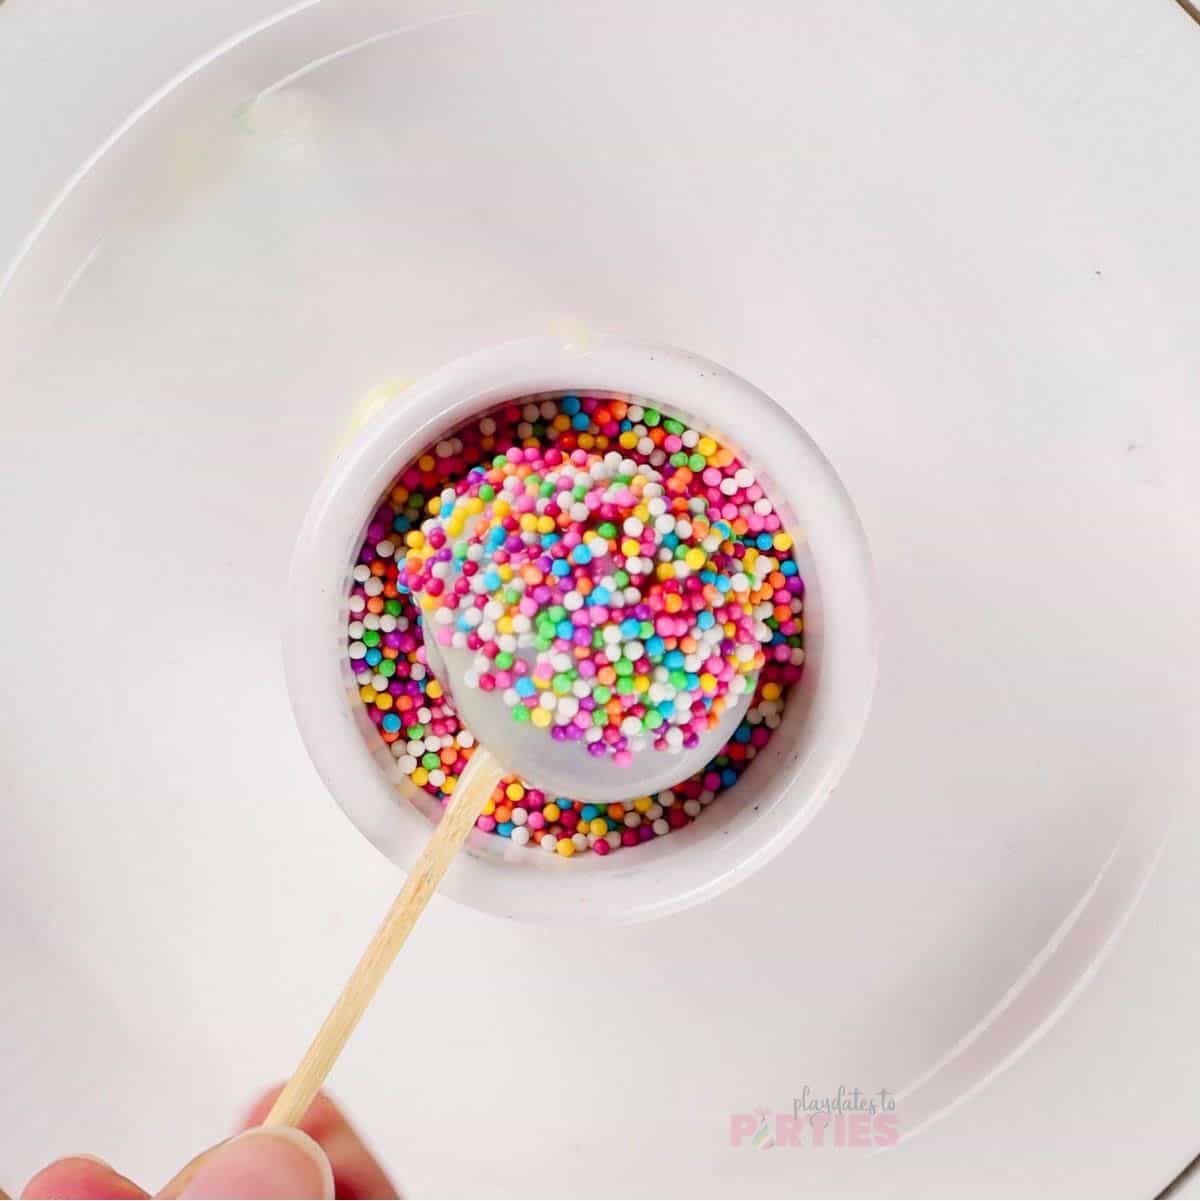 Dipping chocolate covered cake pops into sprinkles.